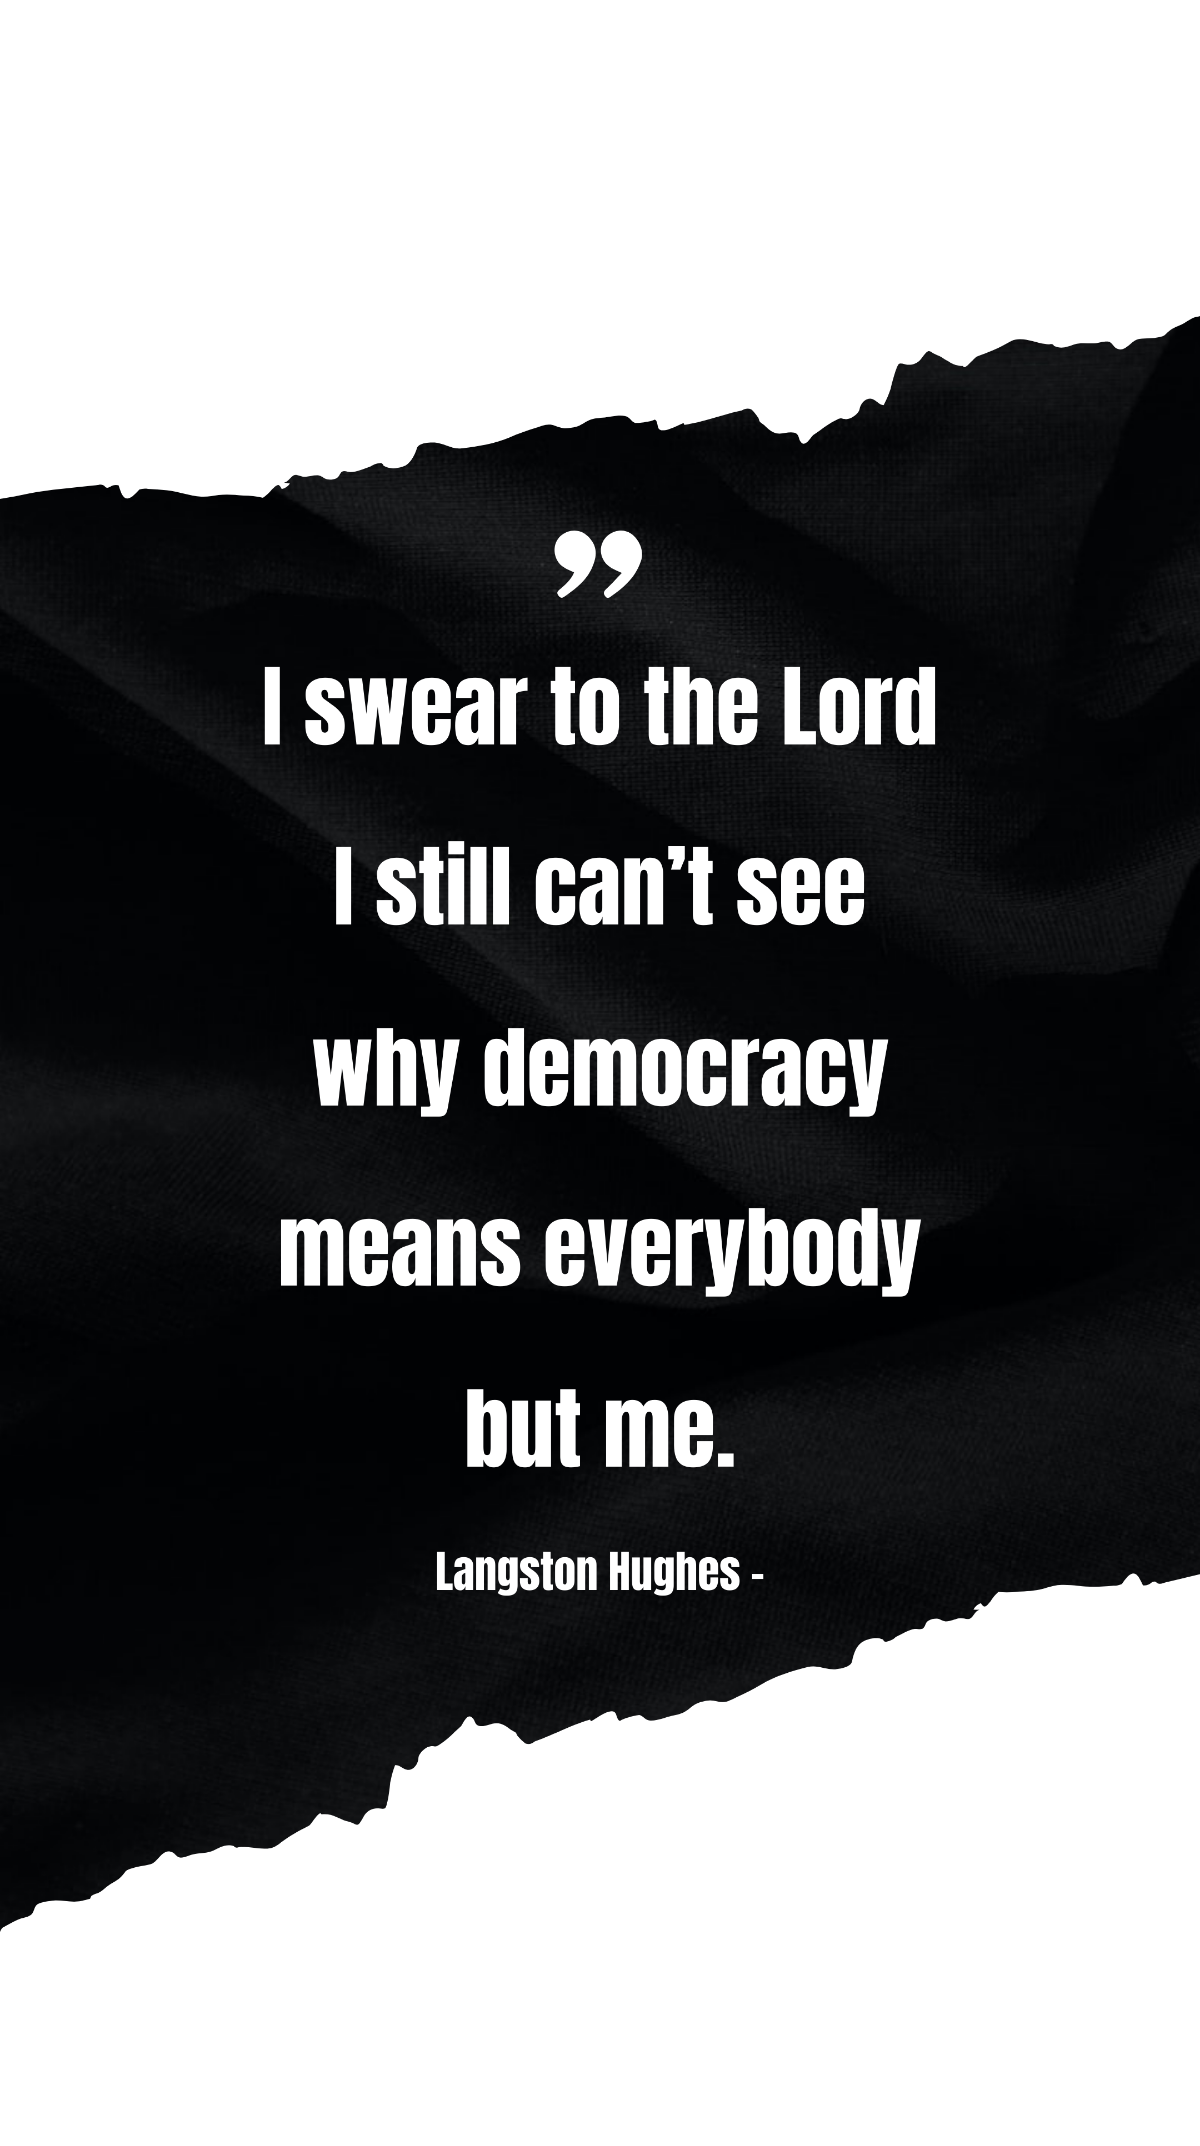 Langston Hughes - I swear to the Lord I still can’t see why democracy means everybody but me.